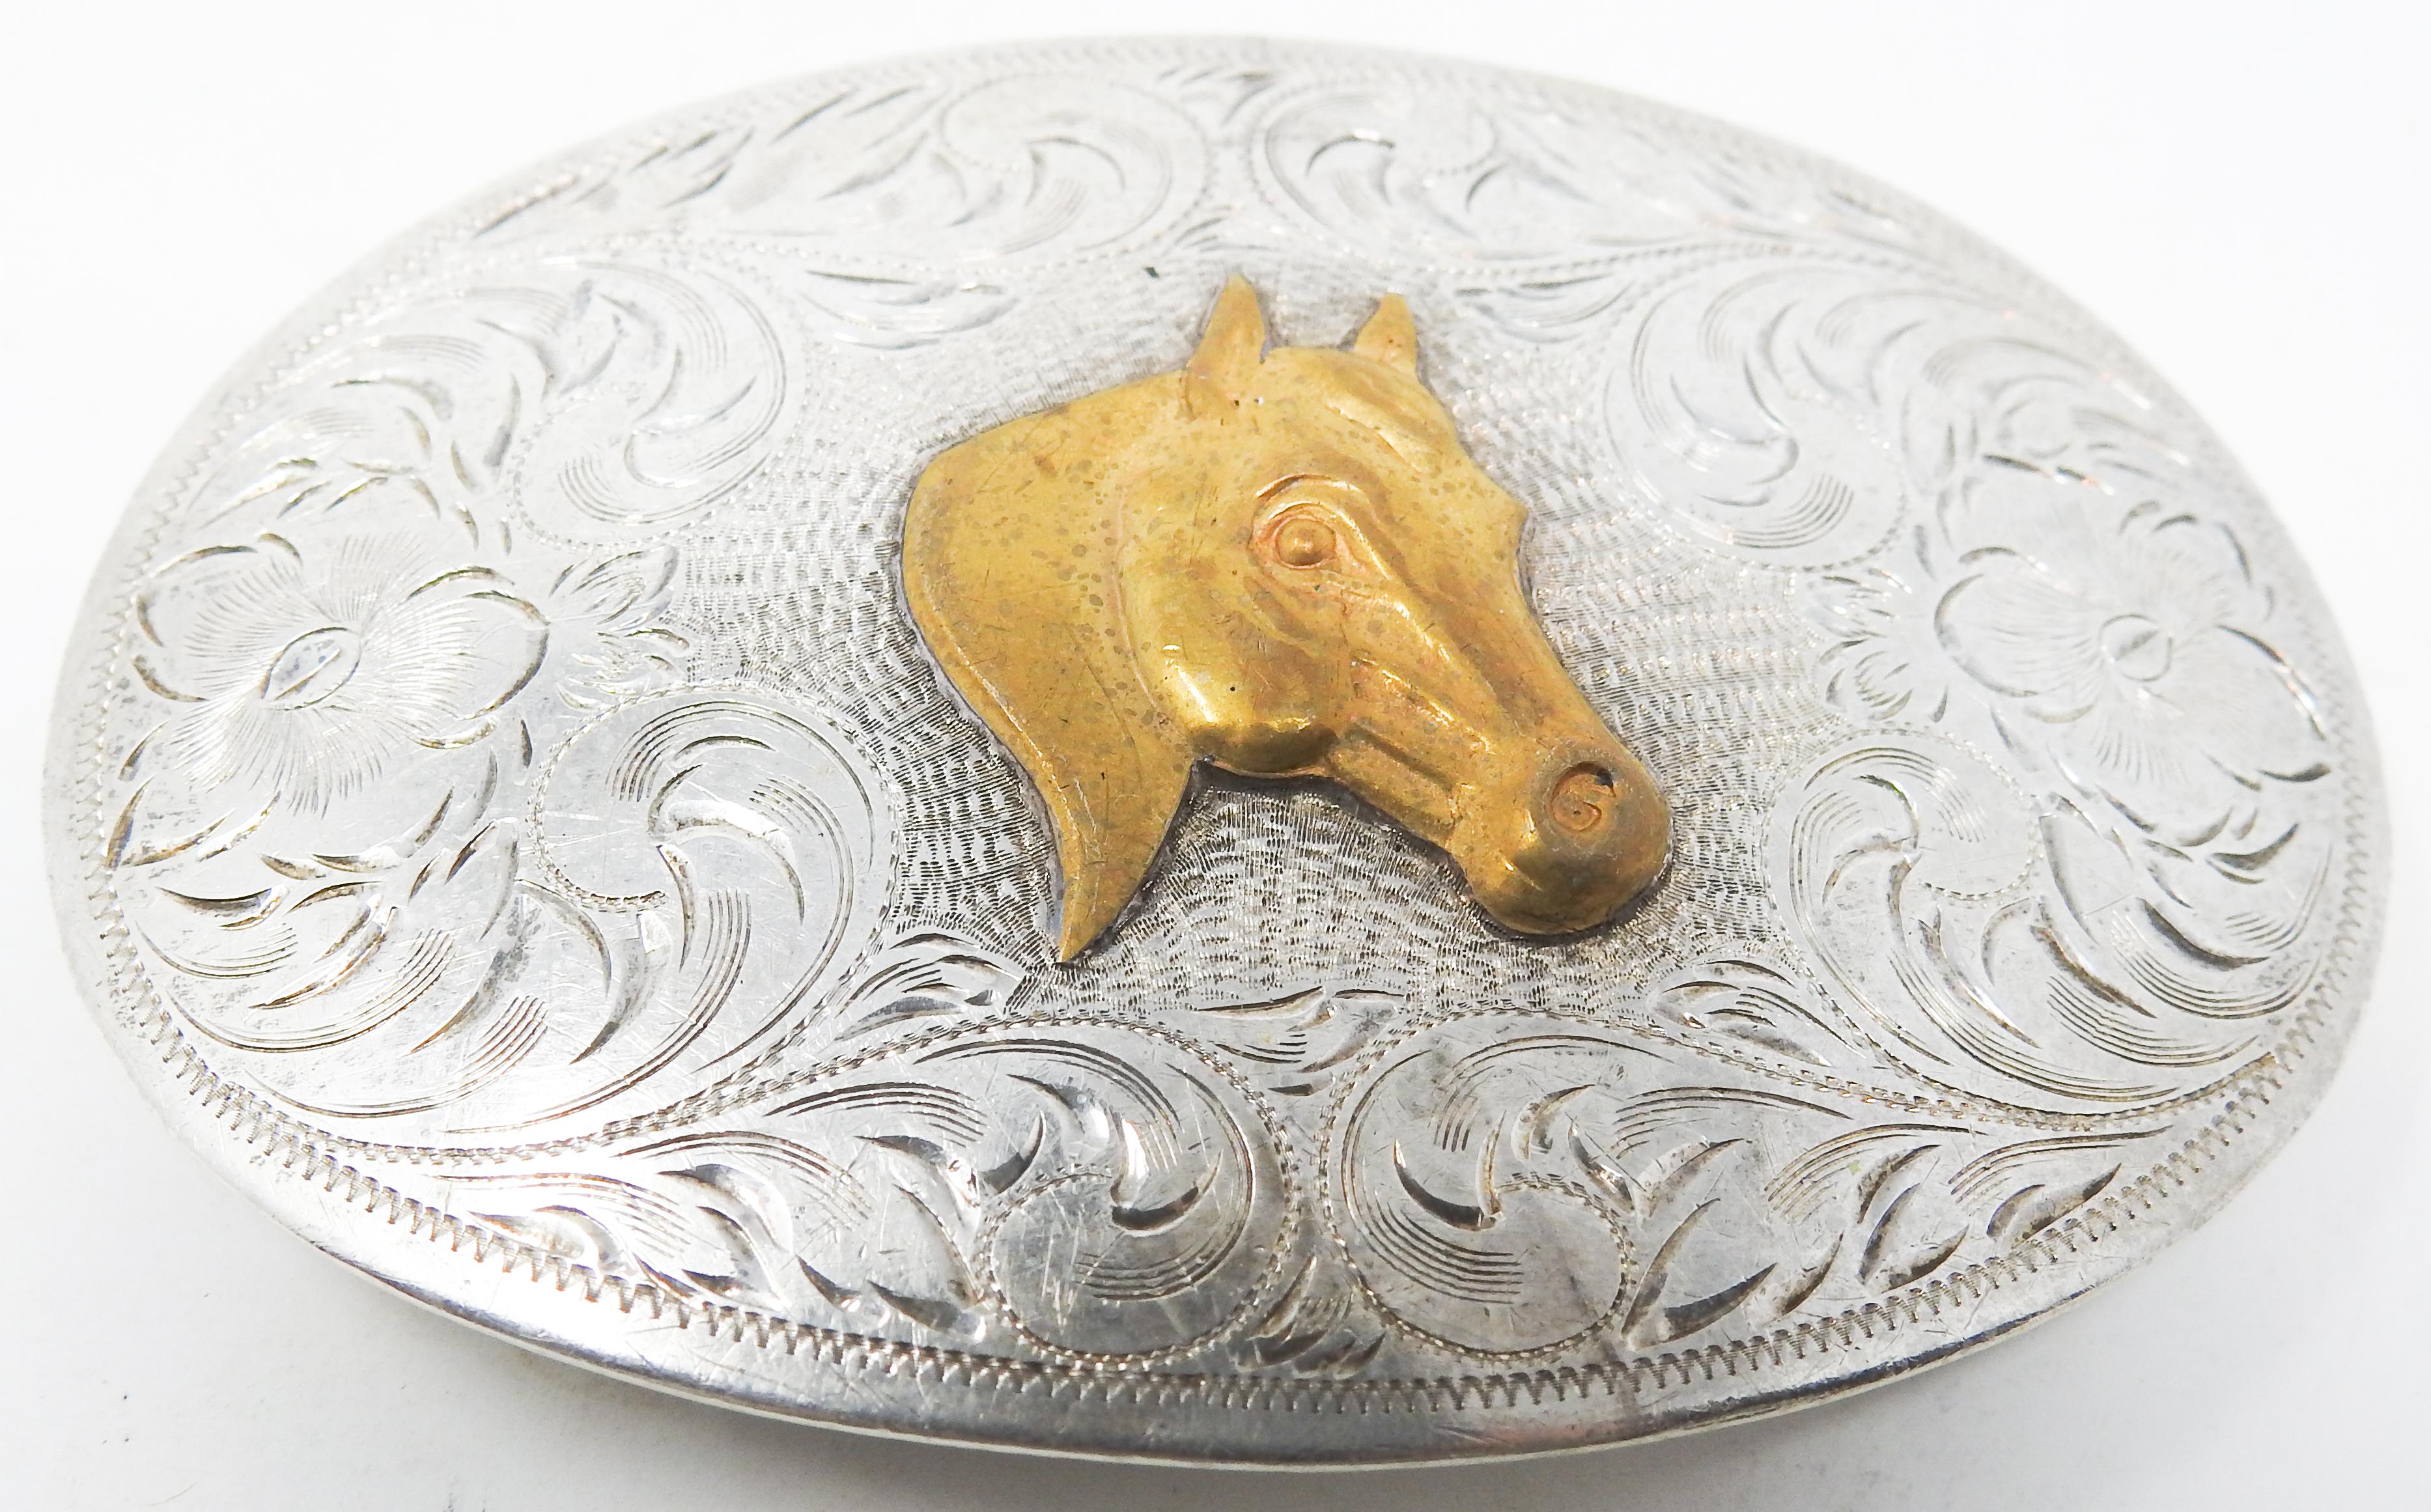 Offering this handsome Diablo sterling silver with brass horse head belt buckle. The front of the buckle has some floral and scrollwork engraved filigree. In the center is a solid brass horse head. The back of the buckle has all the working parts.